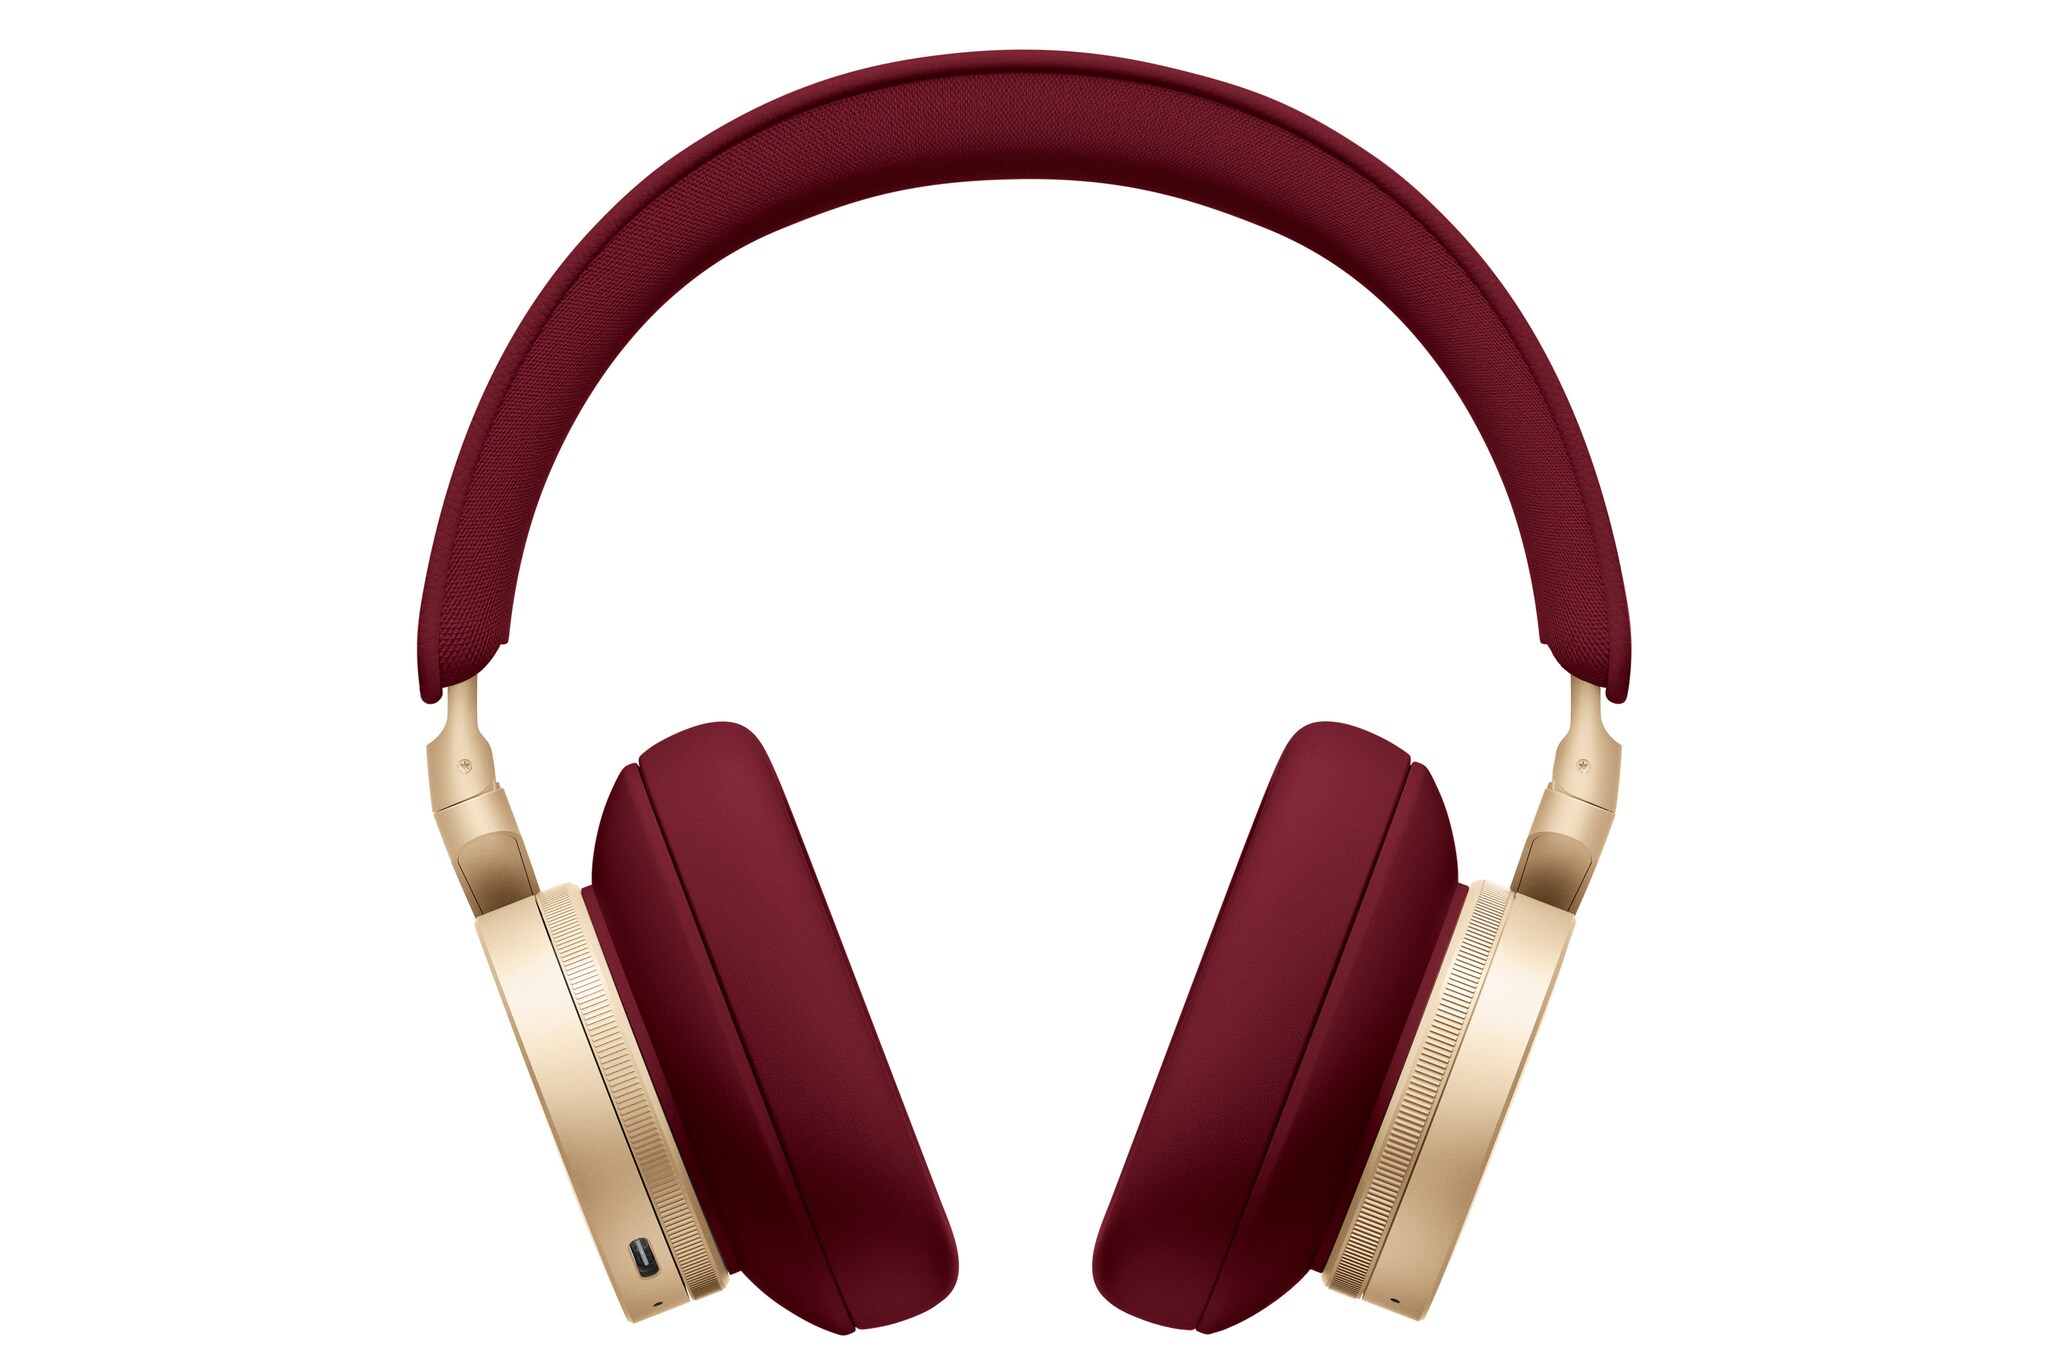 Cuffie over-ear Beoplay H95, BANG & OLUFSEN (899 €, colore in edizione limitata).